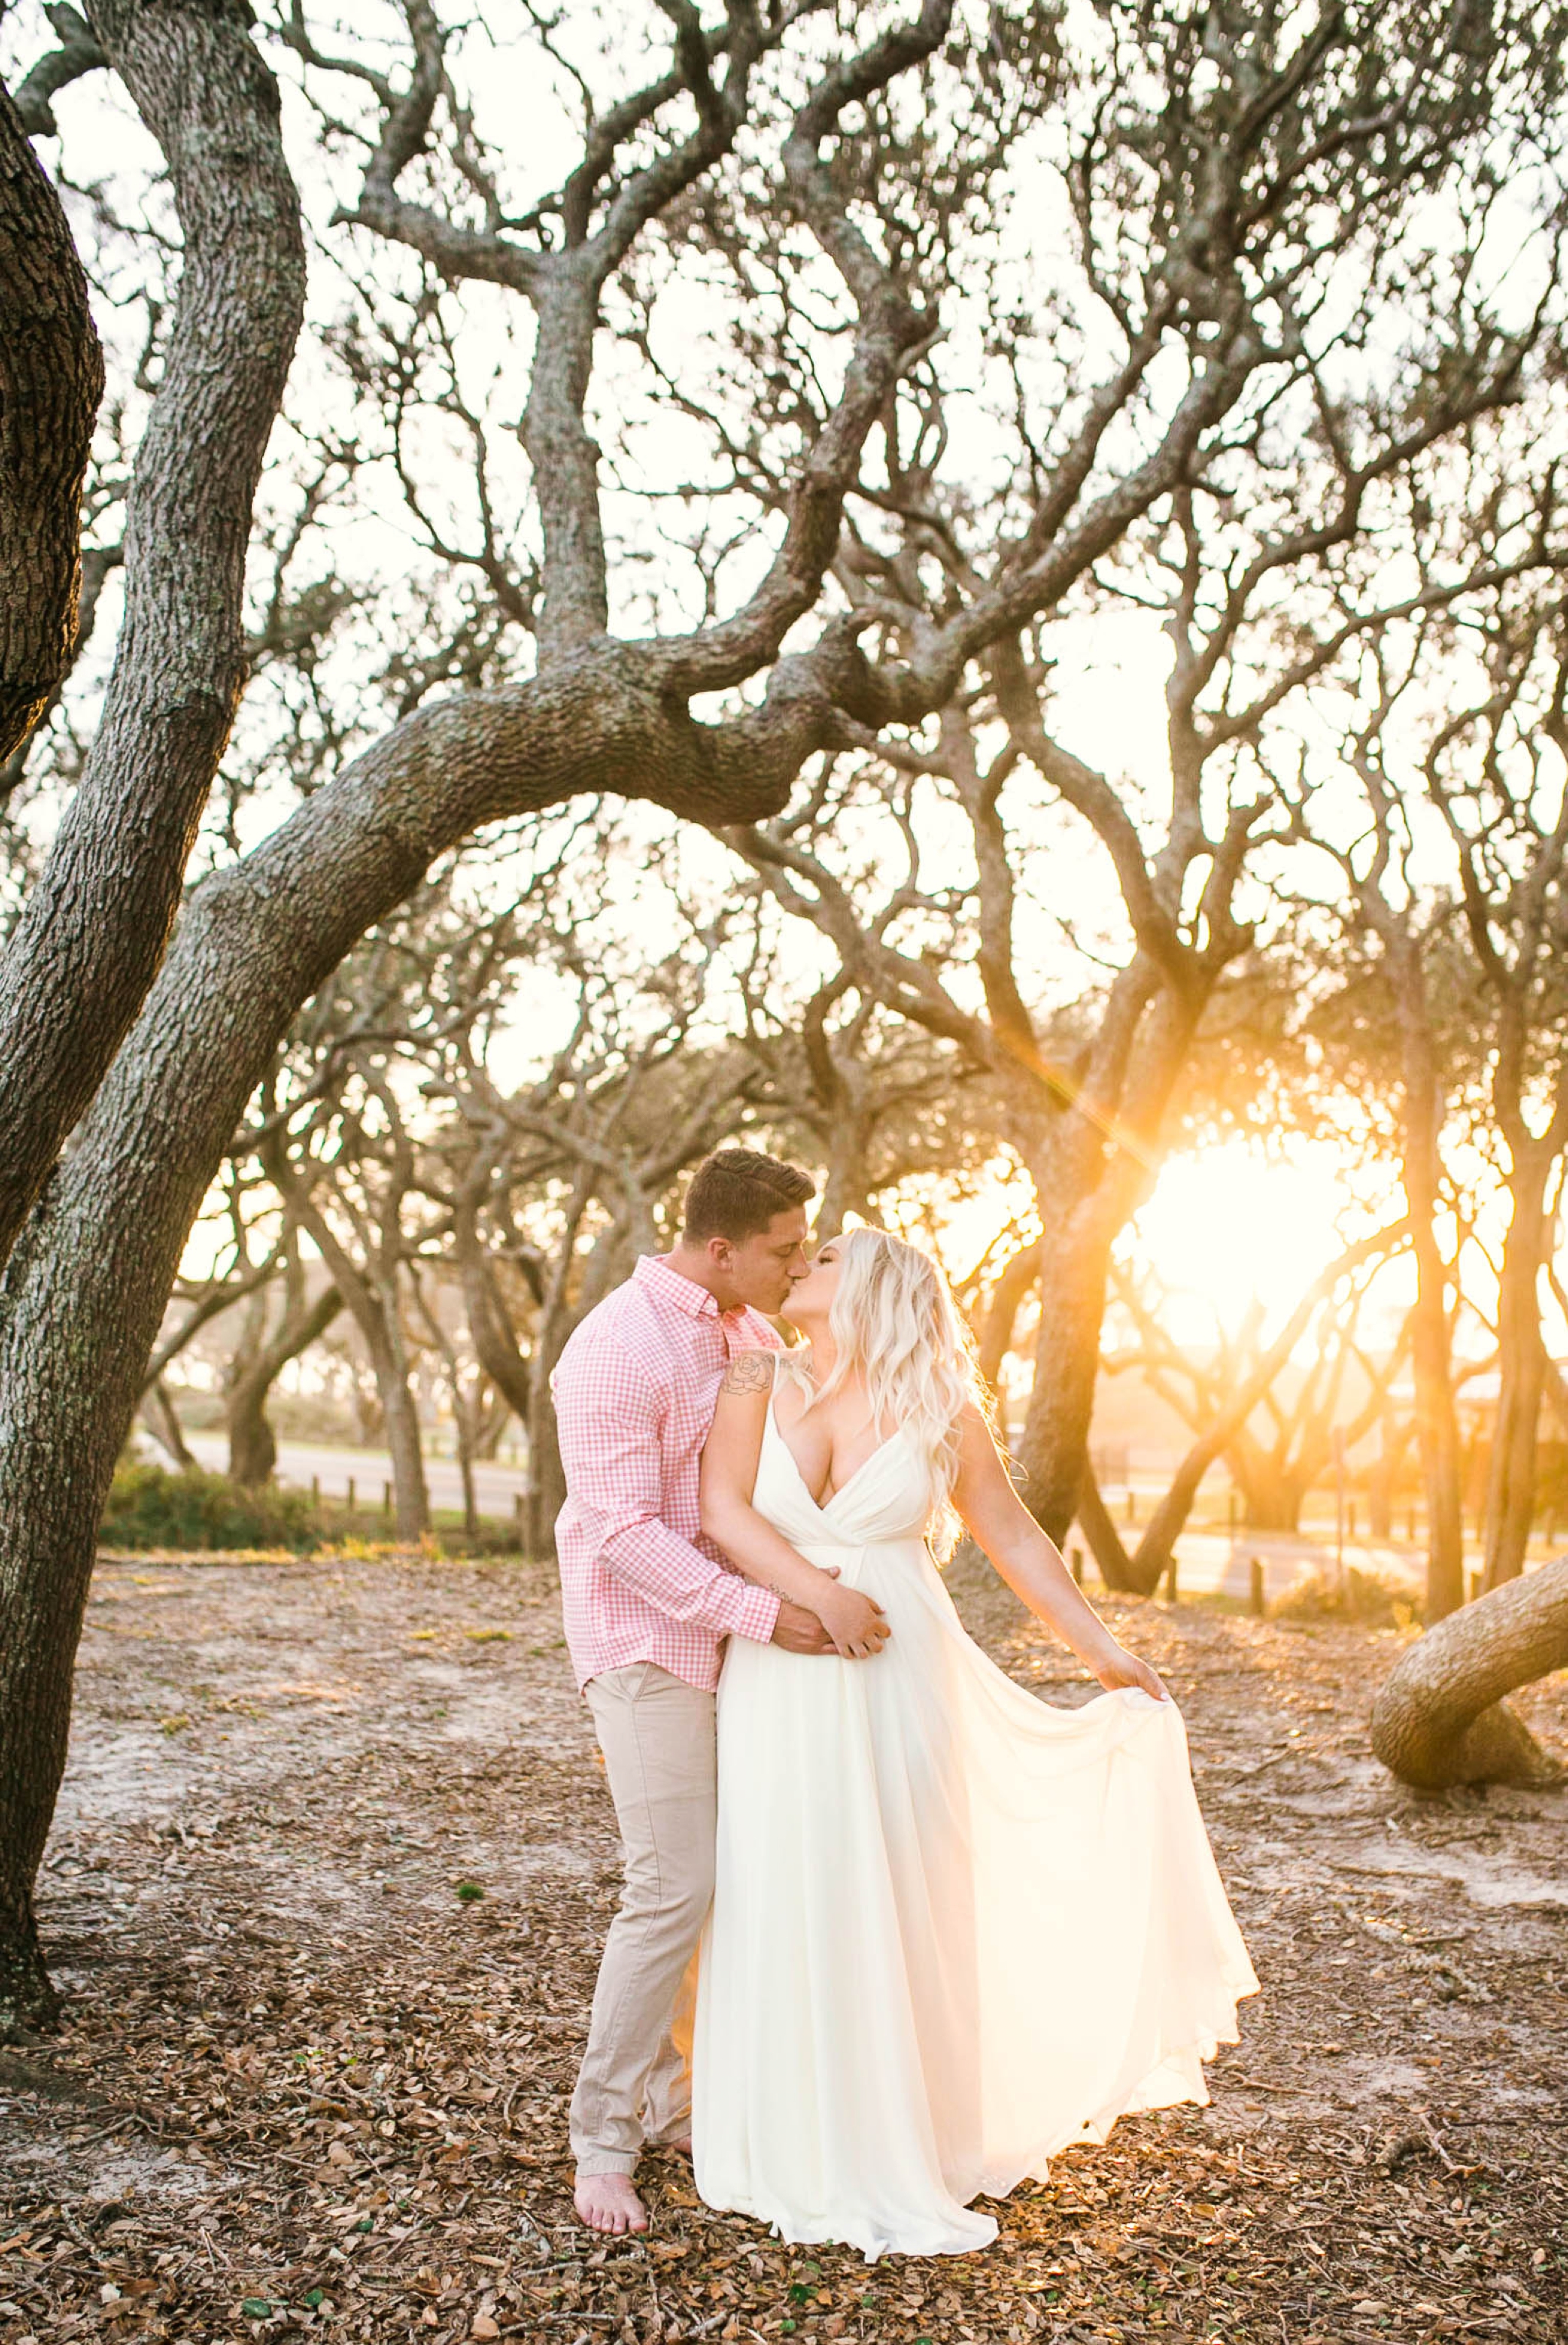  Engagement Photography Session beneath tropical trees at sunset during golden hour light - man kissing his fiance, woman is playing with her dress - girl is wearing a white flowy maxi dress from lulus - Honolulu Oahu Hawaii Wedding Photographer - Jo